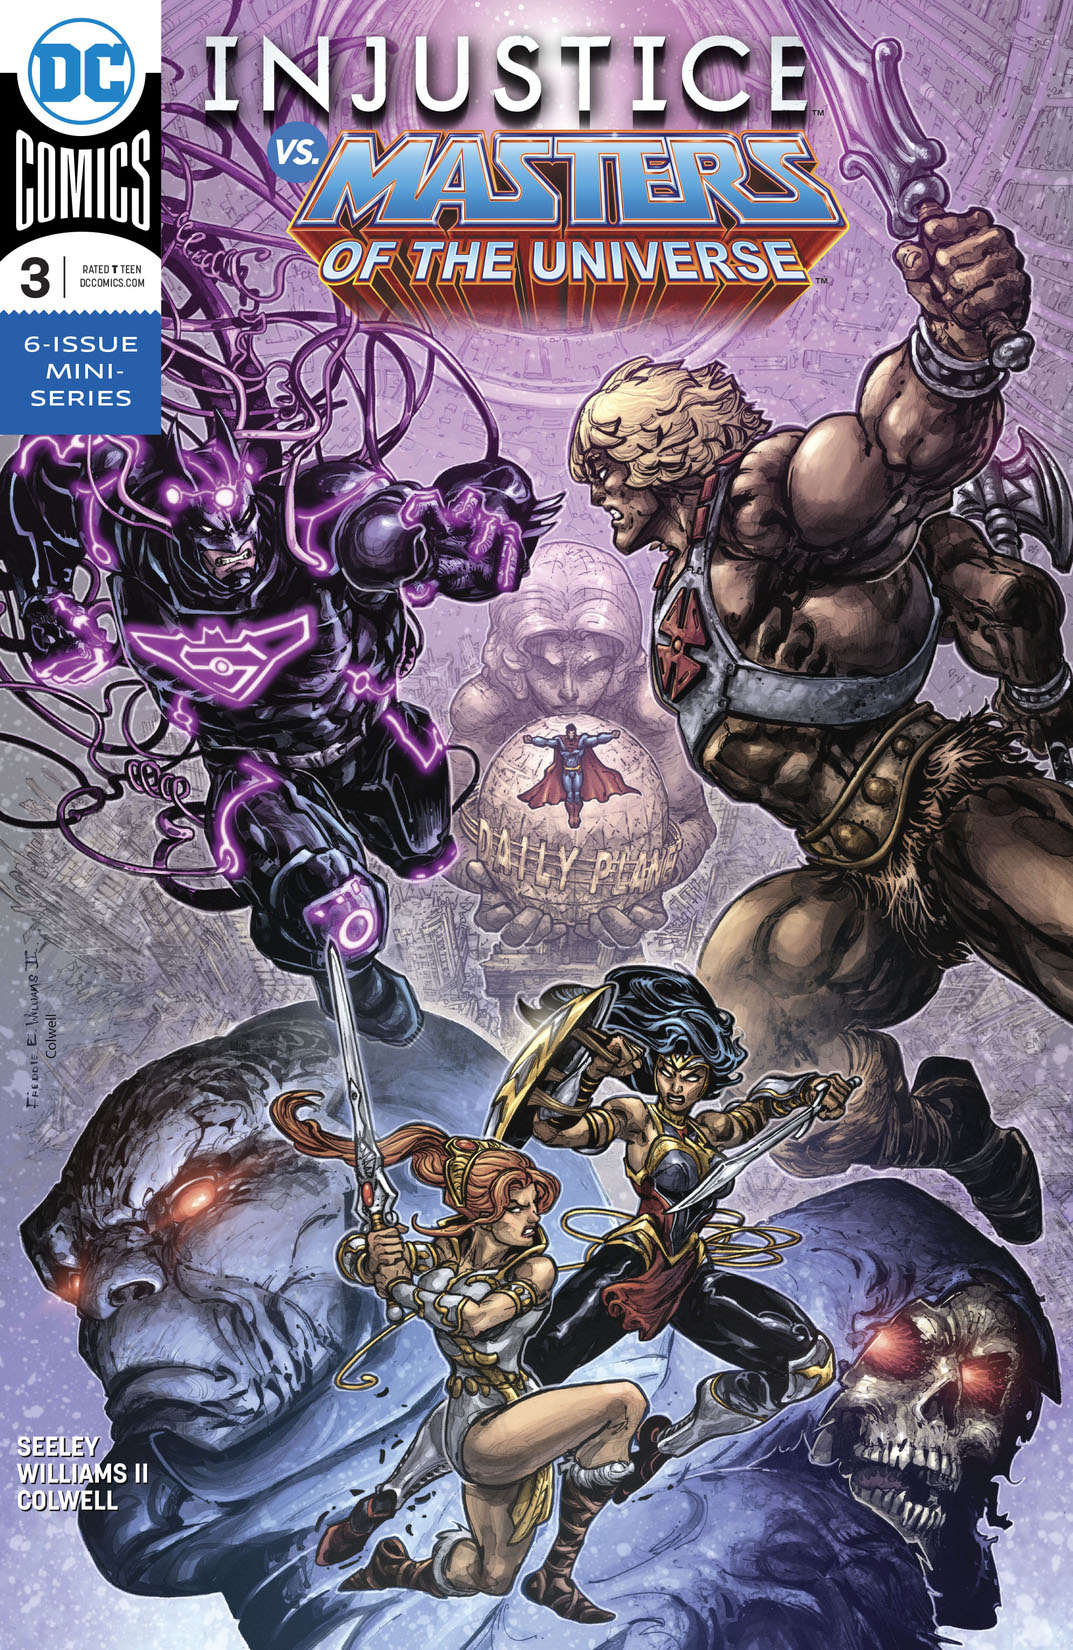 Injustice Vs. Masters of the Universe #3 preview images